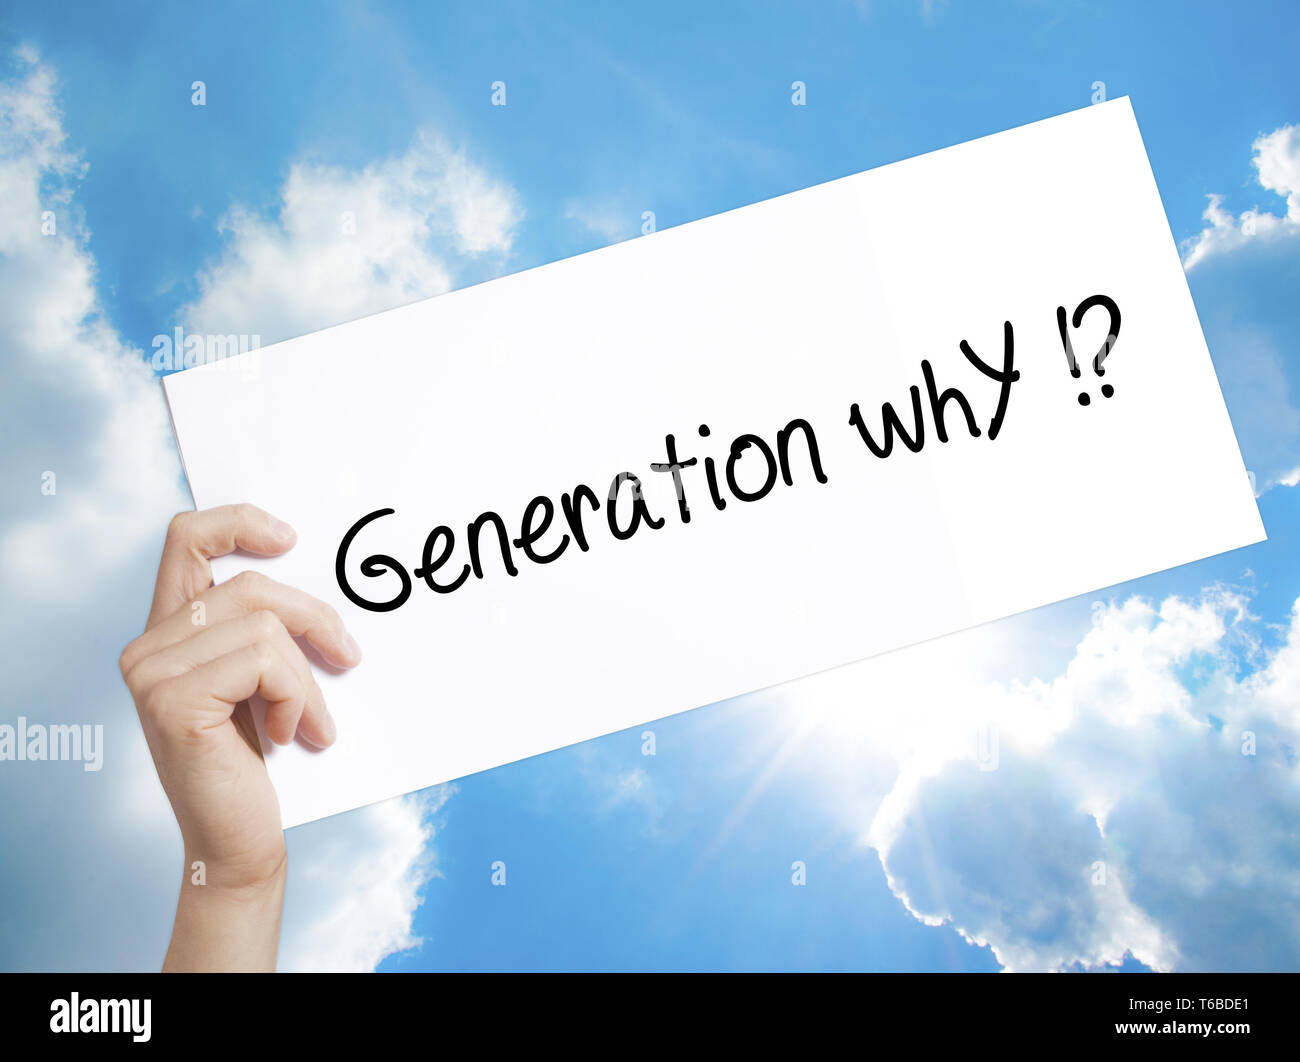 Generation whY !? Sign on white paper. Man Hand Holding Paper with text. Isolated on sky background Stock Photo